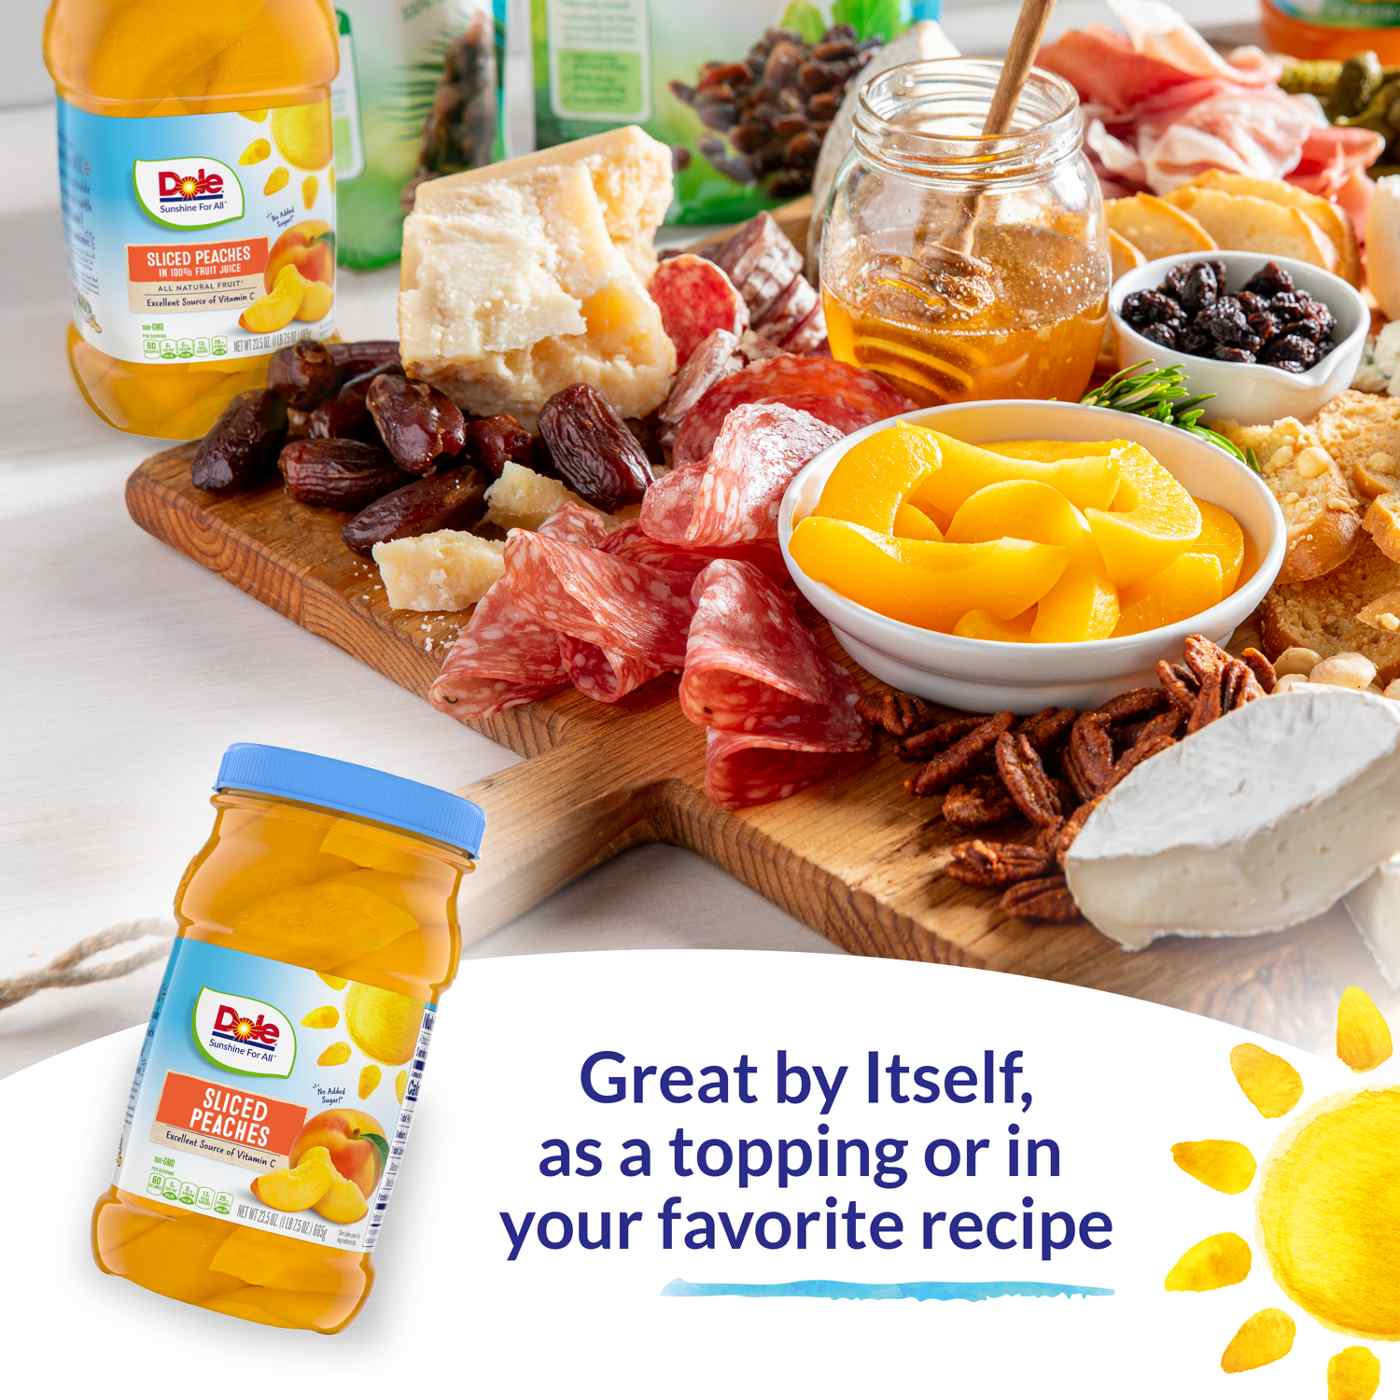 Dole Sliced Peaches in 100% Fruit Juice Jar - Shop Peaches, Plums, &  Apricots at H-E-B